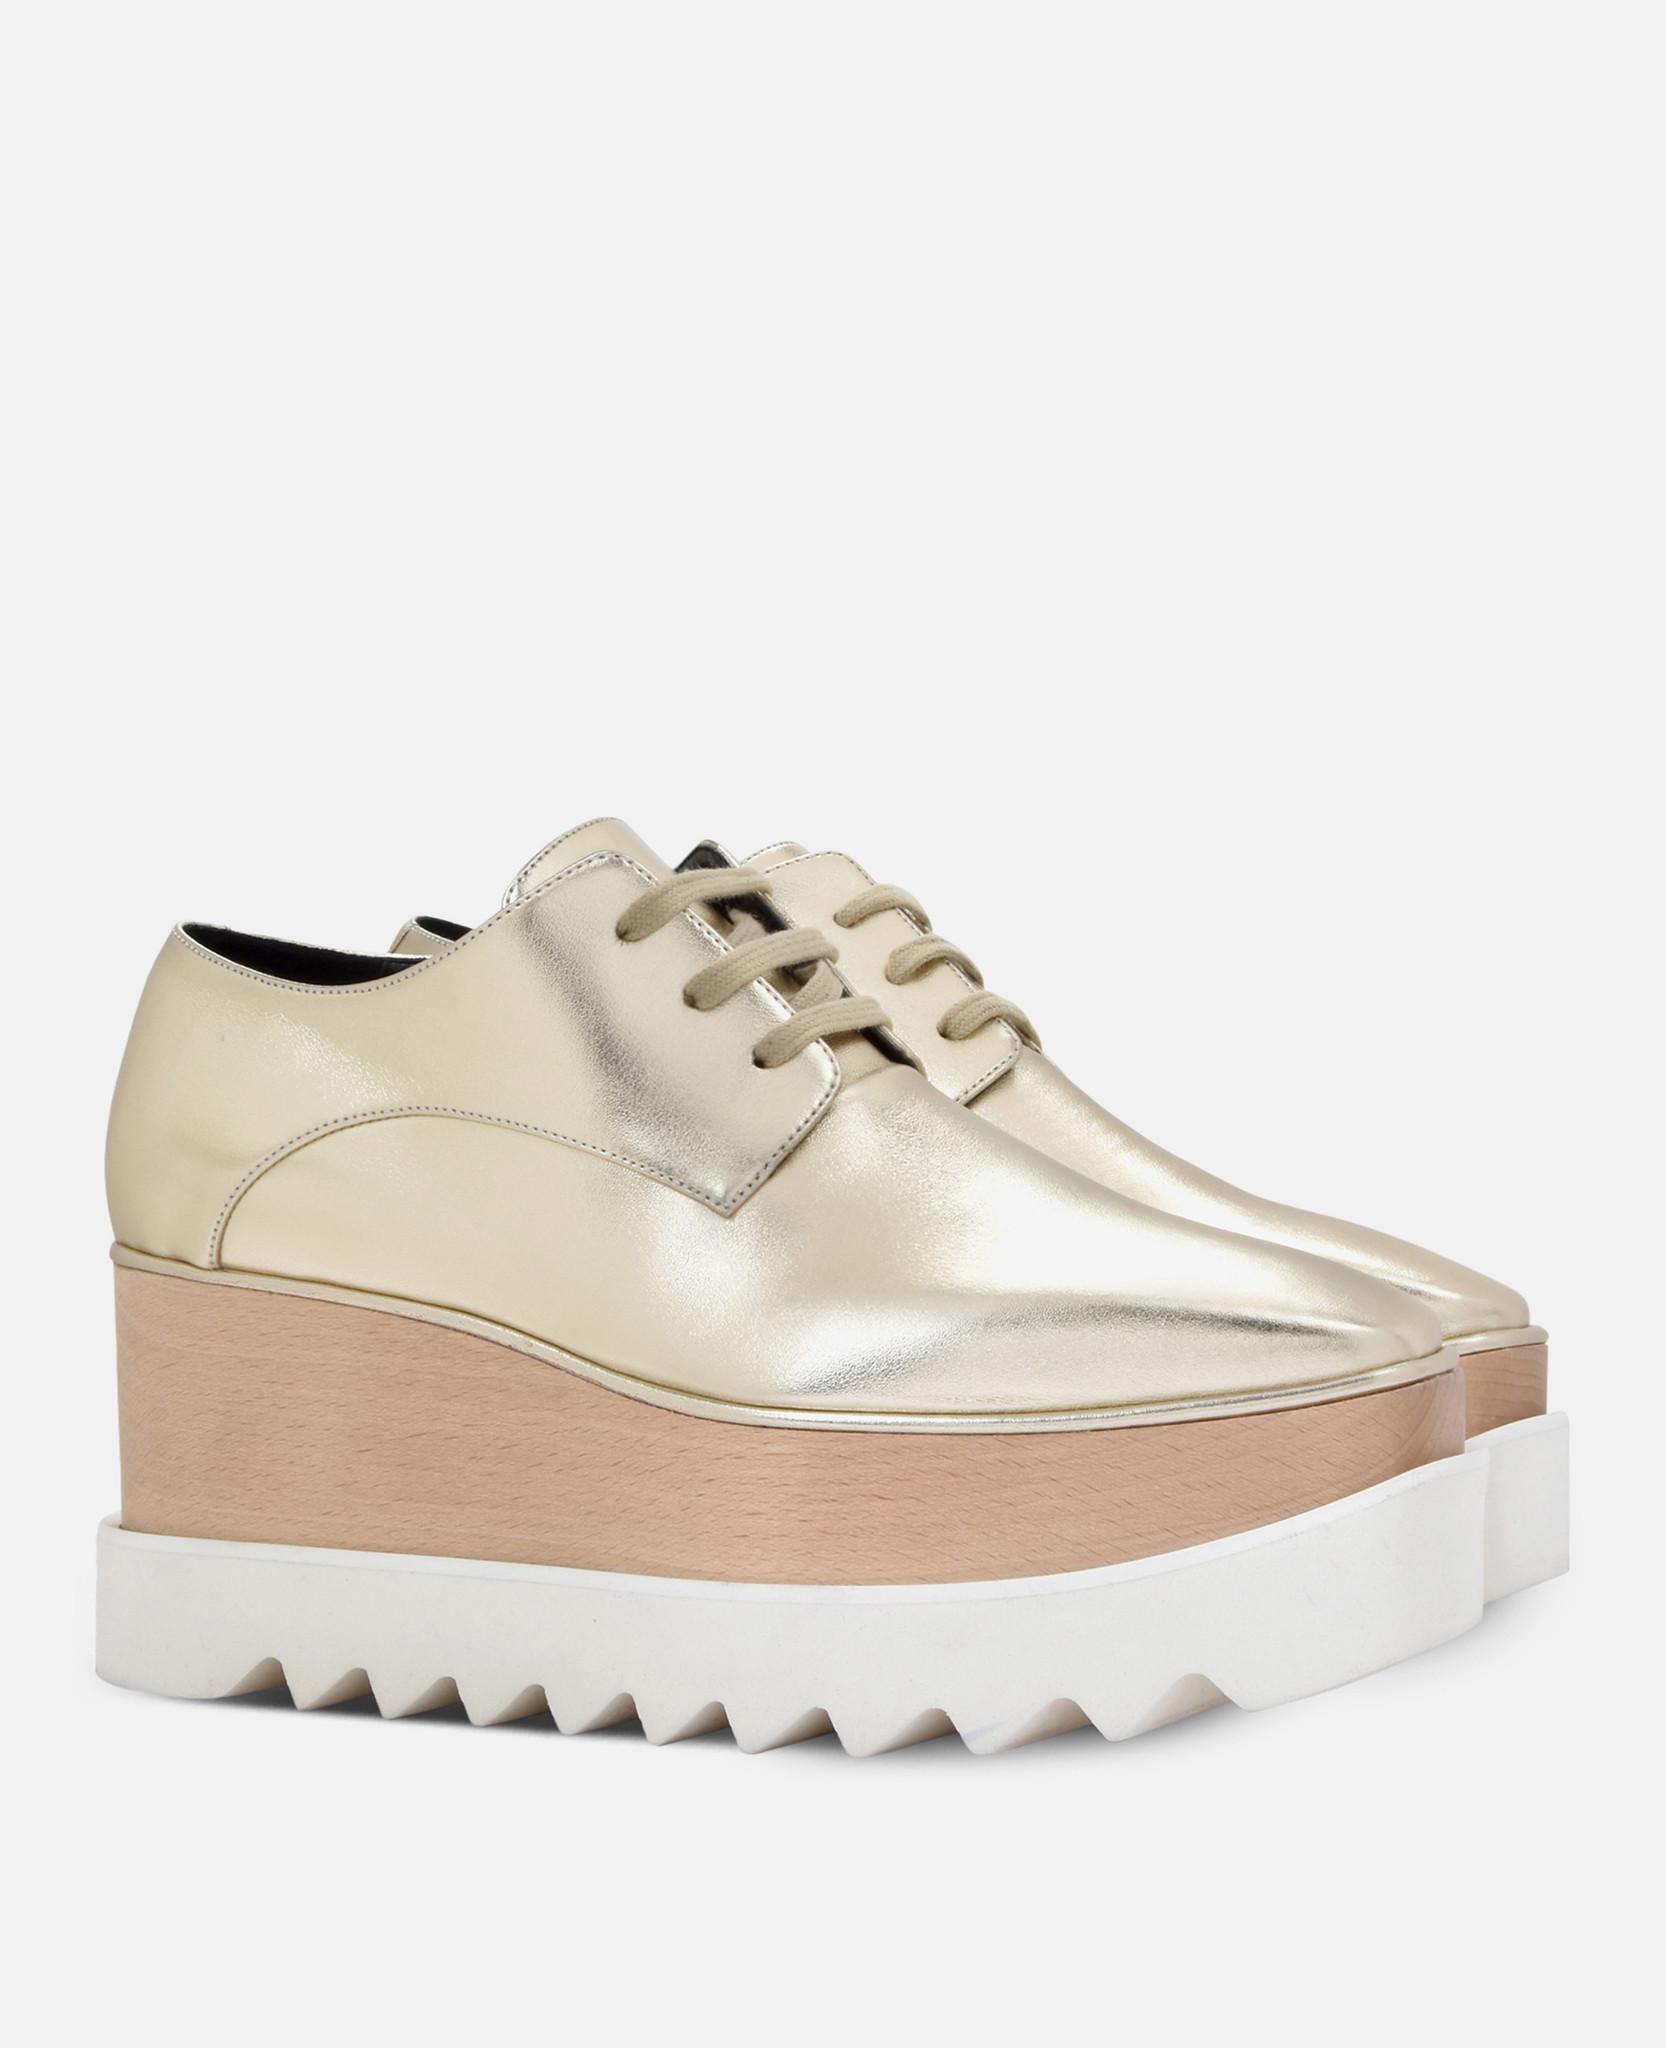 Stella McCartney Rubber Pale Gold Elyse Shoes in Yellow | Lyst